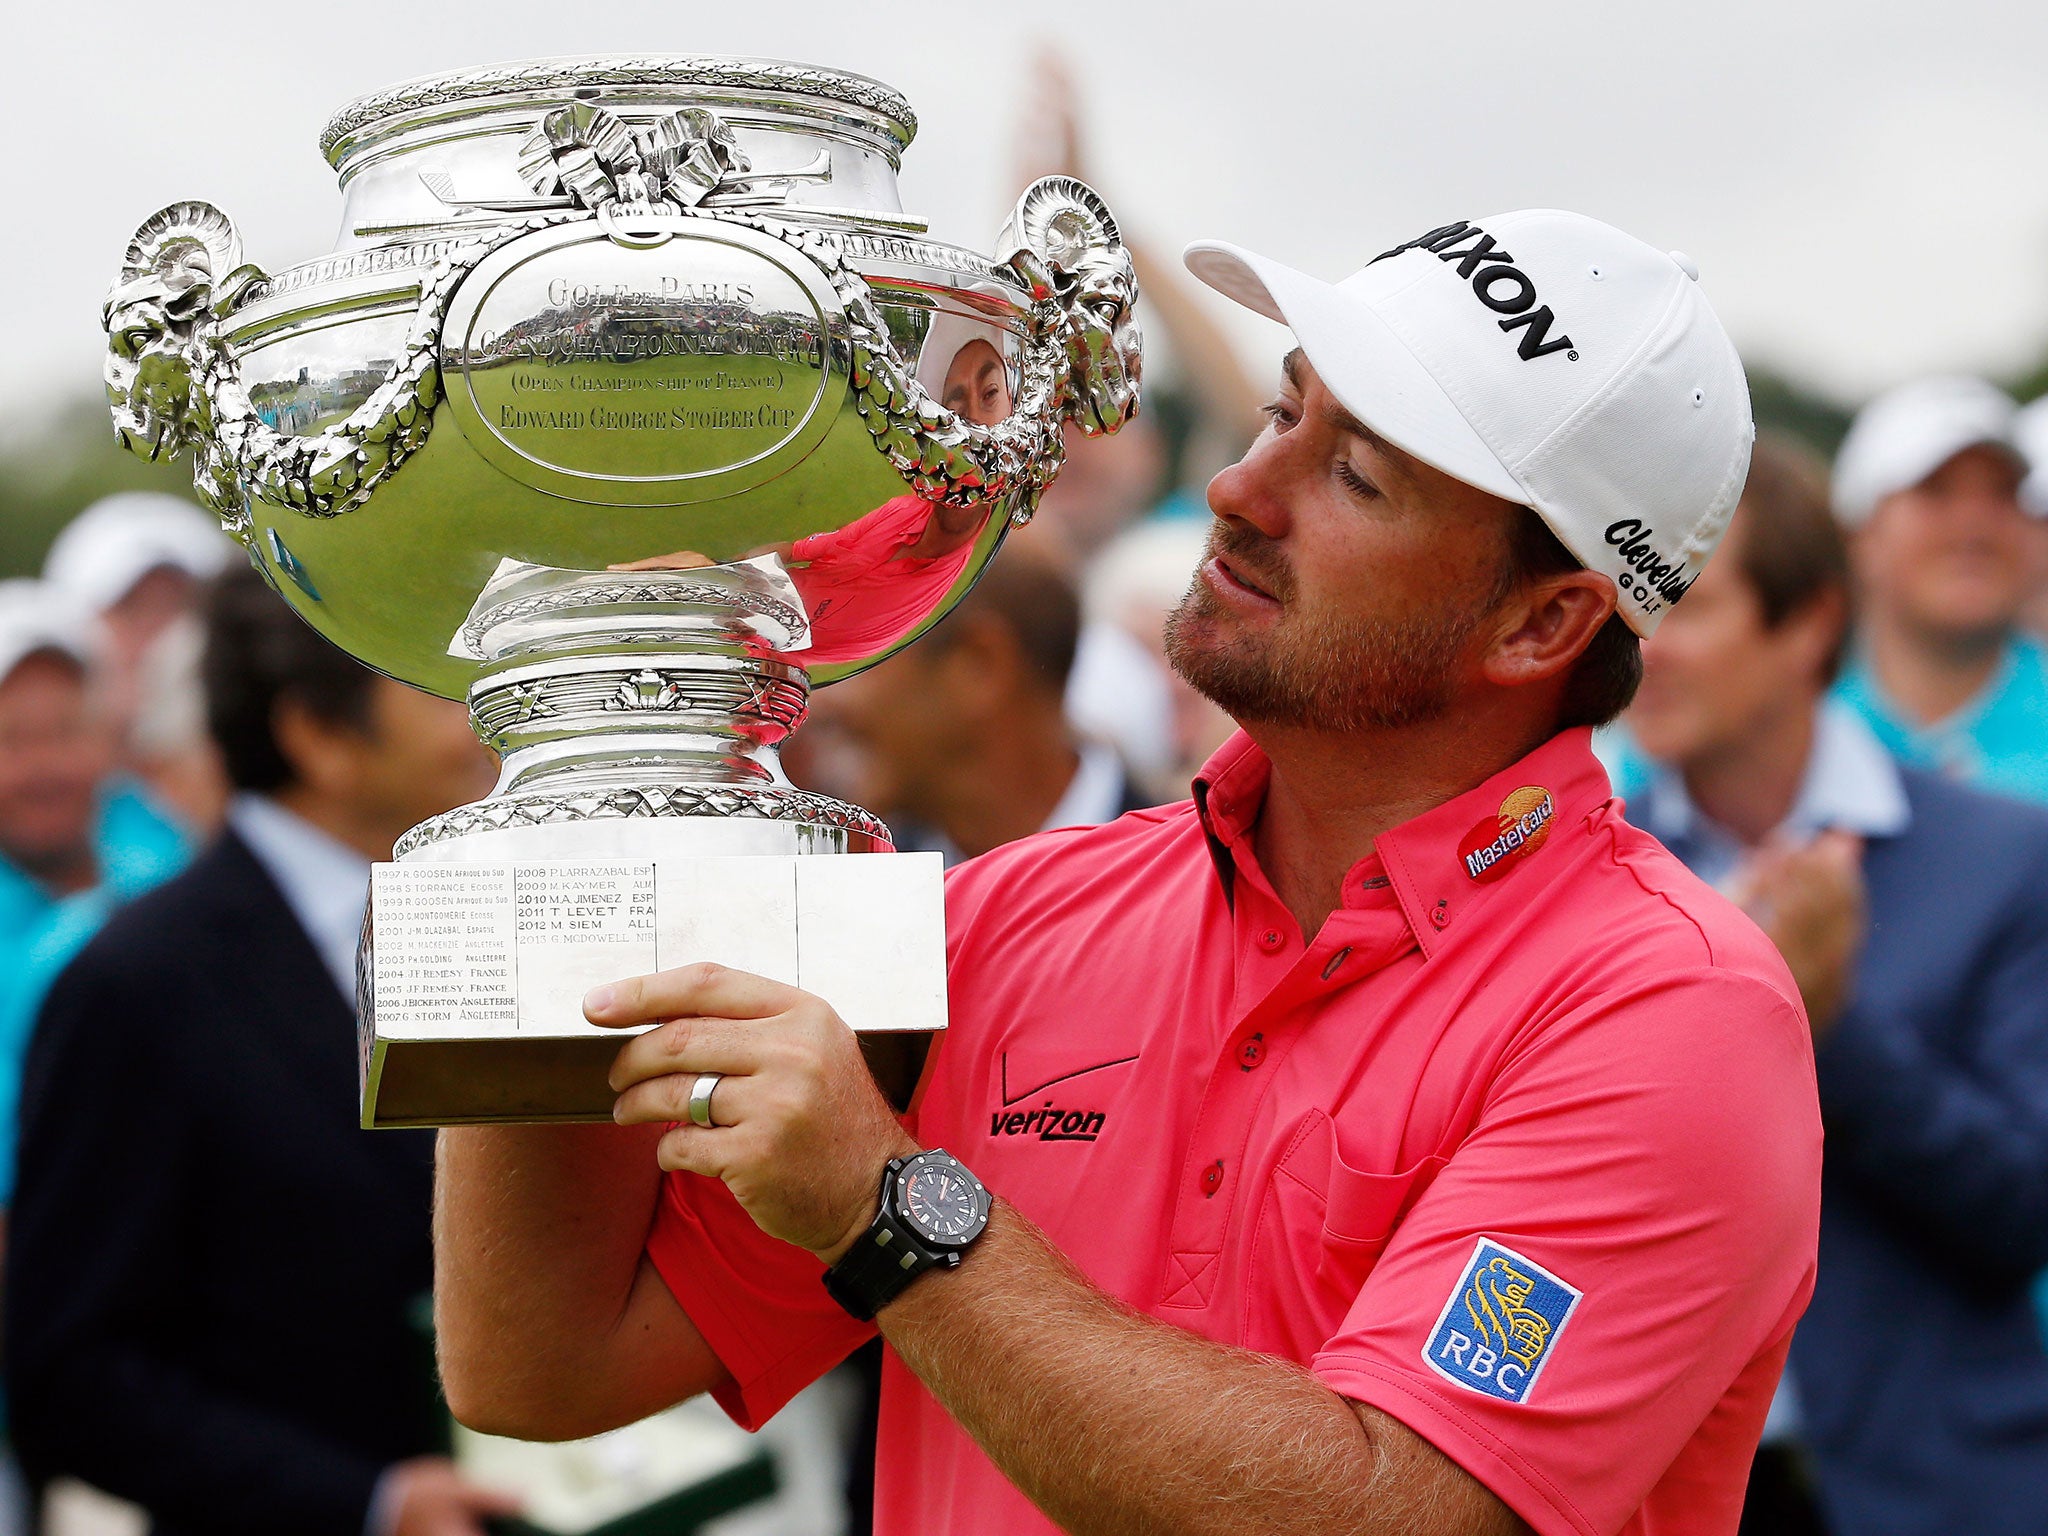 Graeme McDowell of Northern Ireland poses with the trophy after winning the Alstom Open de France - Day Four at Le Golf National on July 6, 2014 in Paris, France